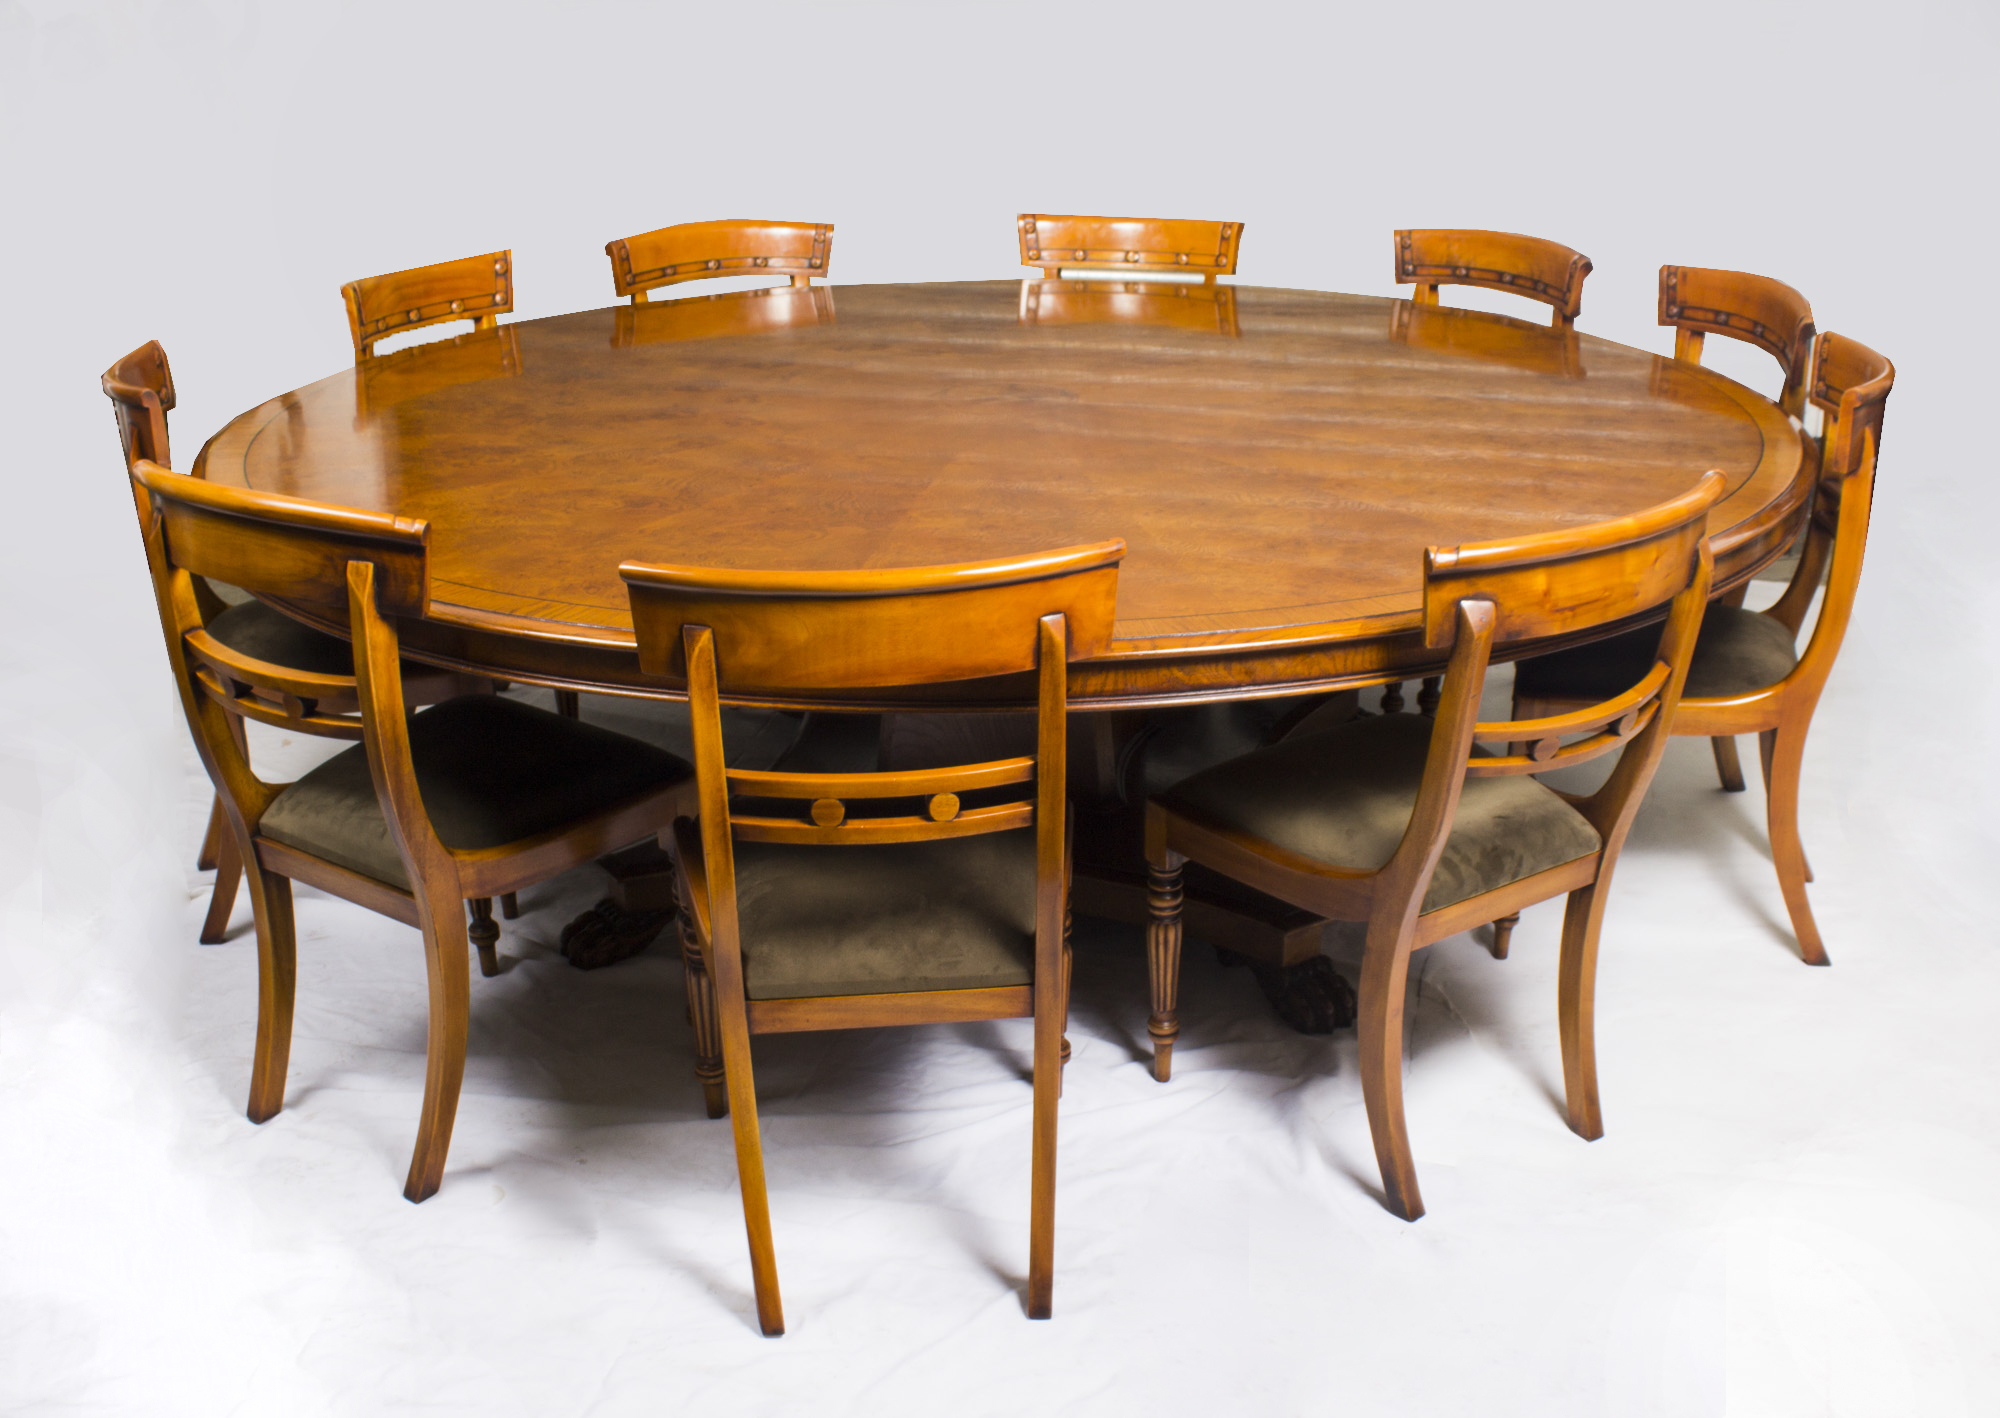 8 foot round tables